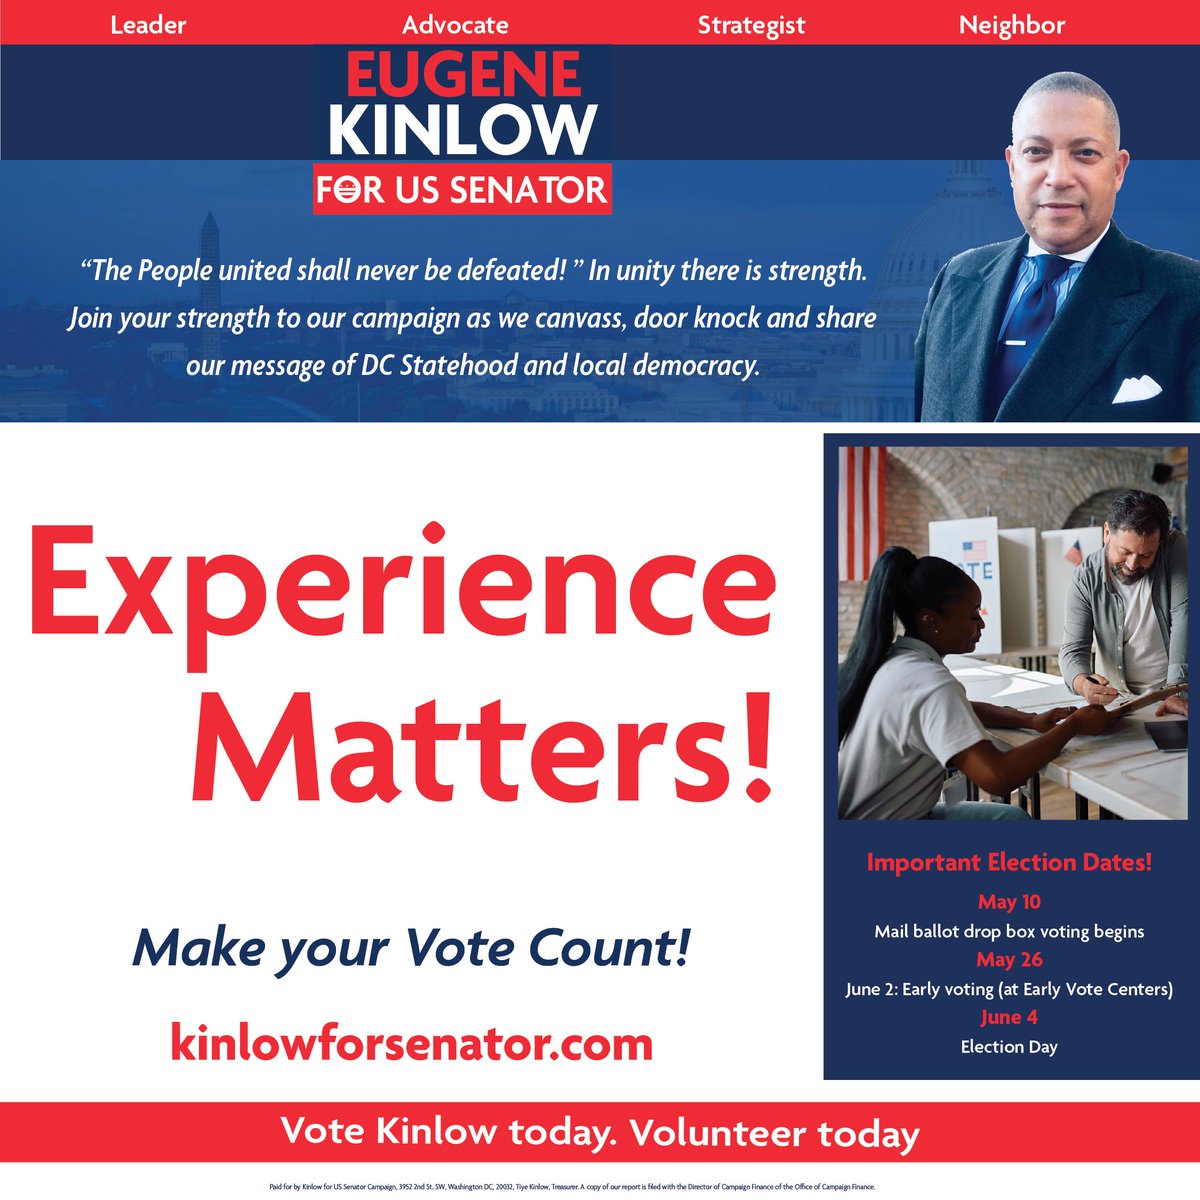 “The People united shall never be defeated! ” In unity there is strength. Join your strength to our campaign as we canvass, door knock and share our message of DC Statehood and local democracy.  #volunteerToday #VoteKinlow